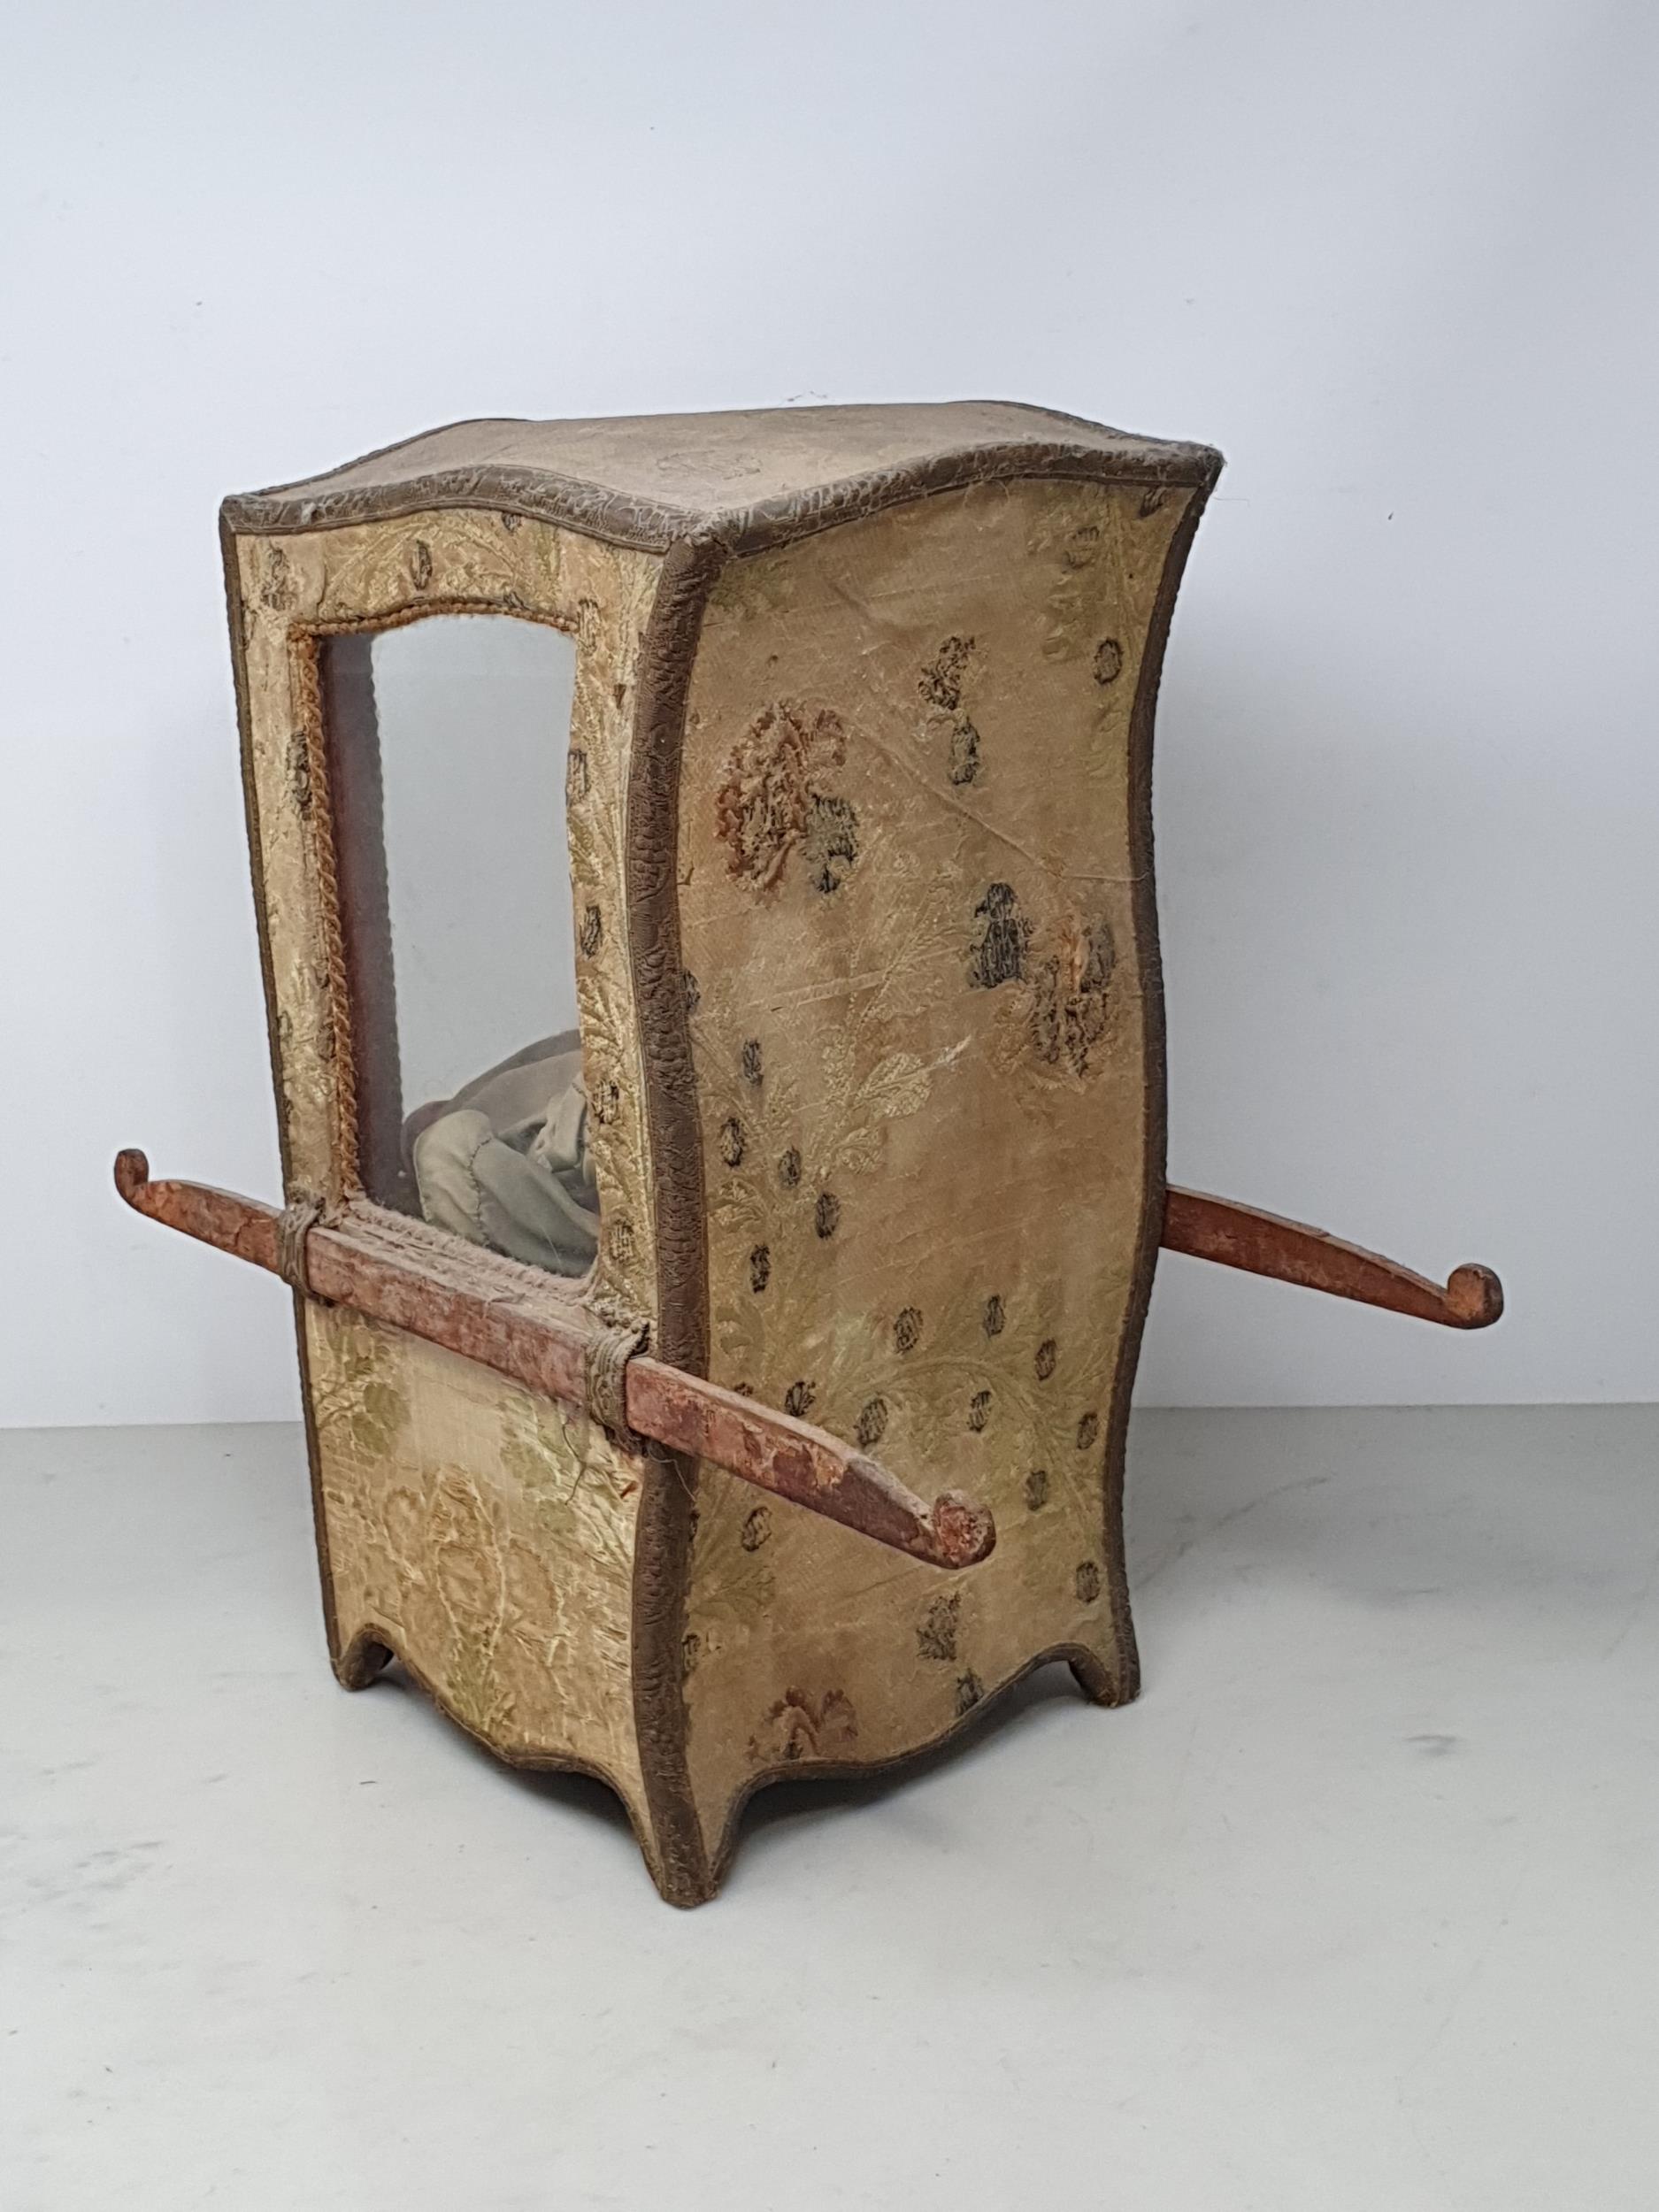 An antique Doll's Sedan Chair with fabric covering and glazed door 14in H x 7in W, with an antique - Image 3 of 4